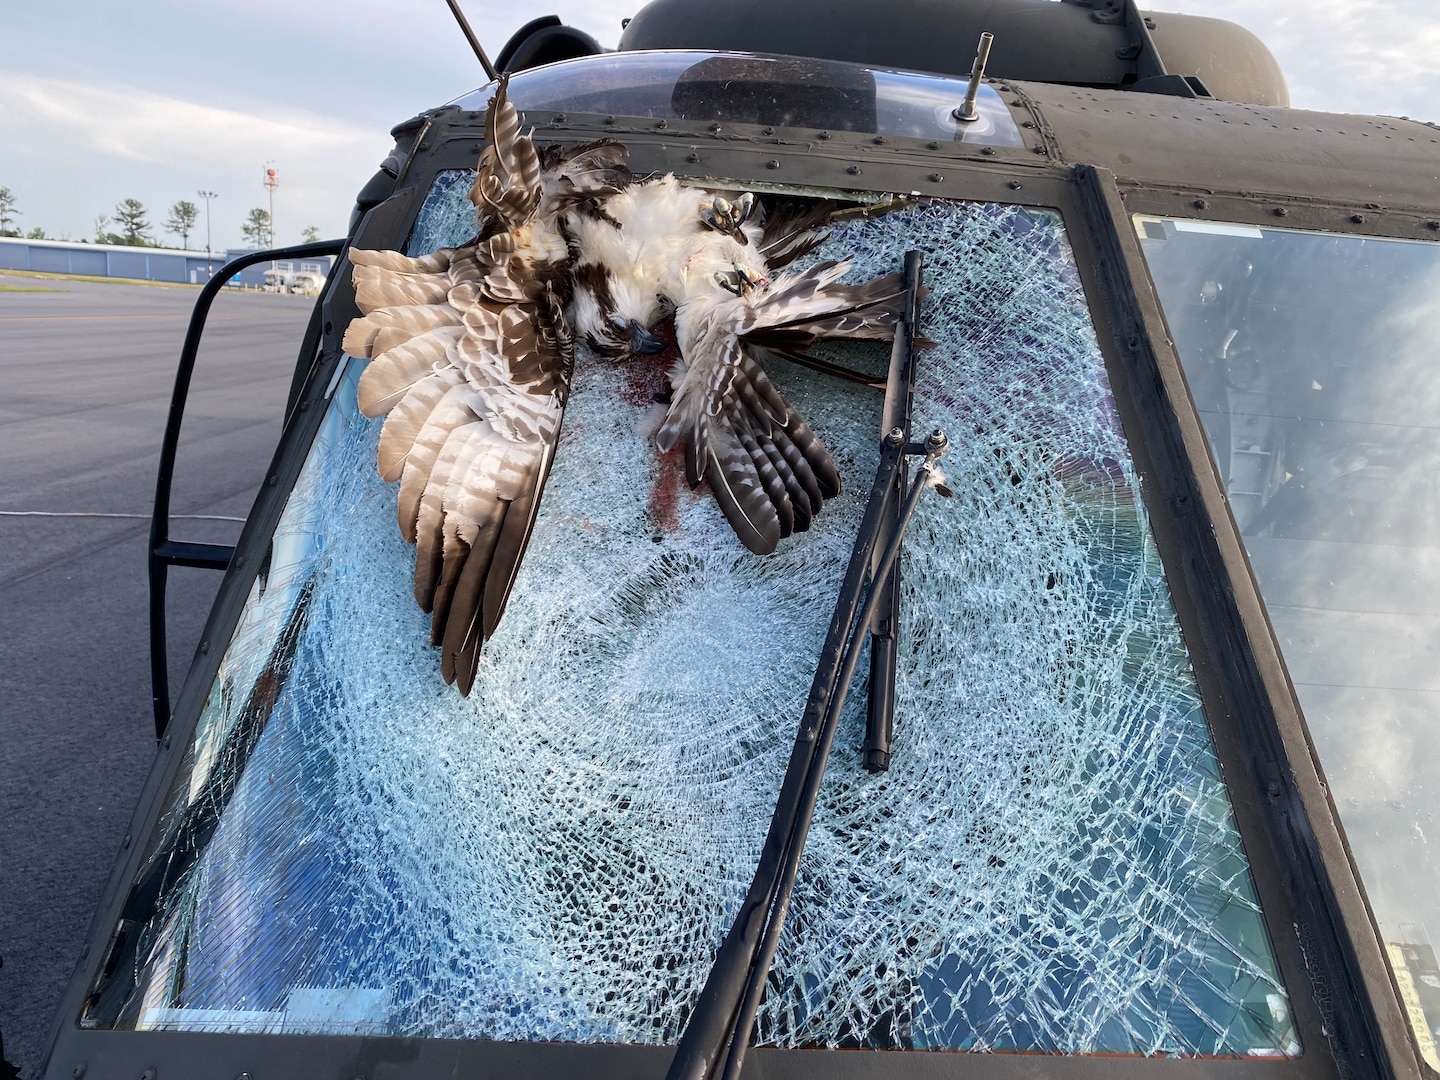 An osprey collided with a UH-60L Black Hawk helicopter flown by a crew of four South Carolina National Guard members as they conducted a routine training flight over the shores of Lake Marion June 1, 2023. The osprey remained partially lodged in the windshield as the crew landed at an airport approximately 10 minutes away.